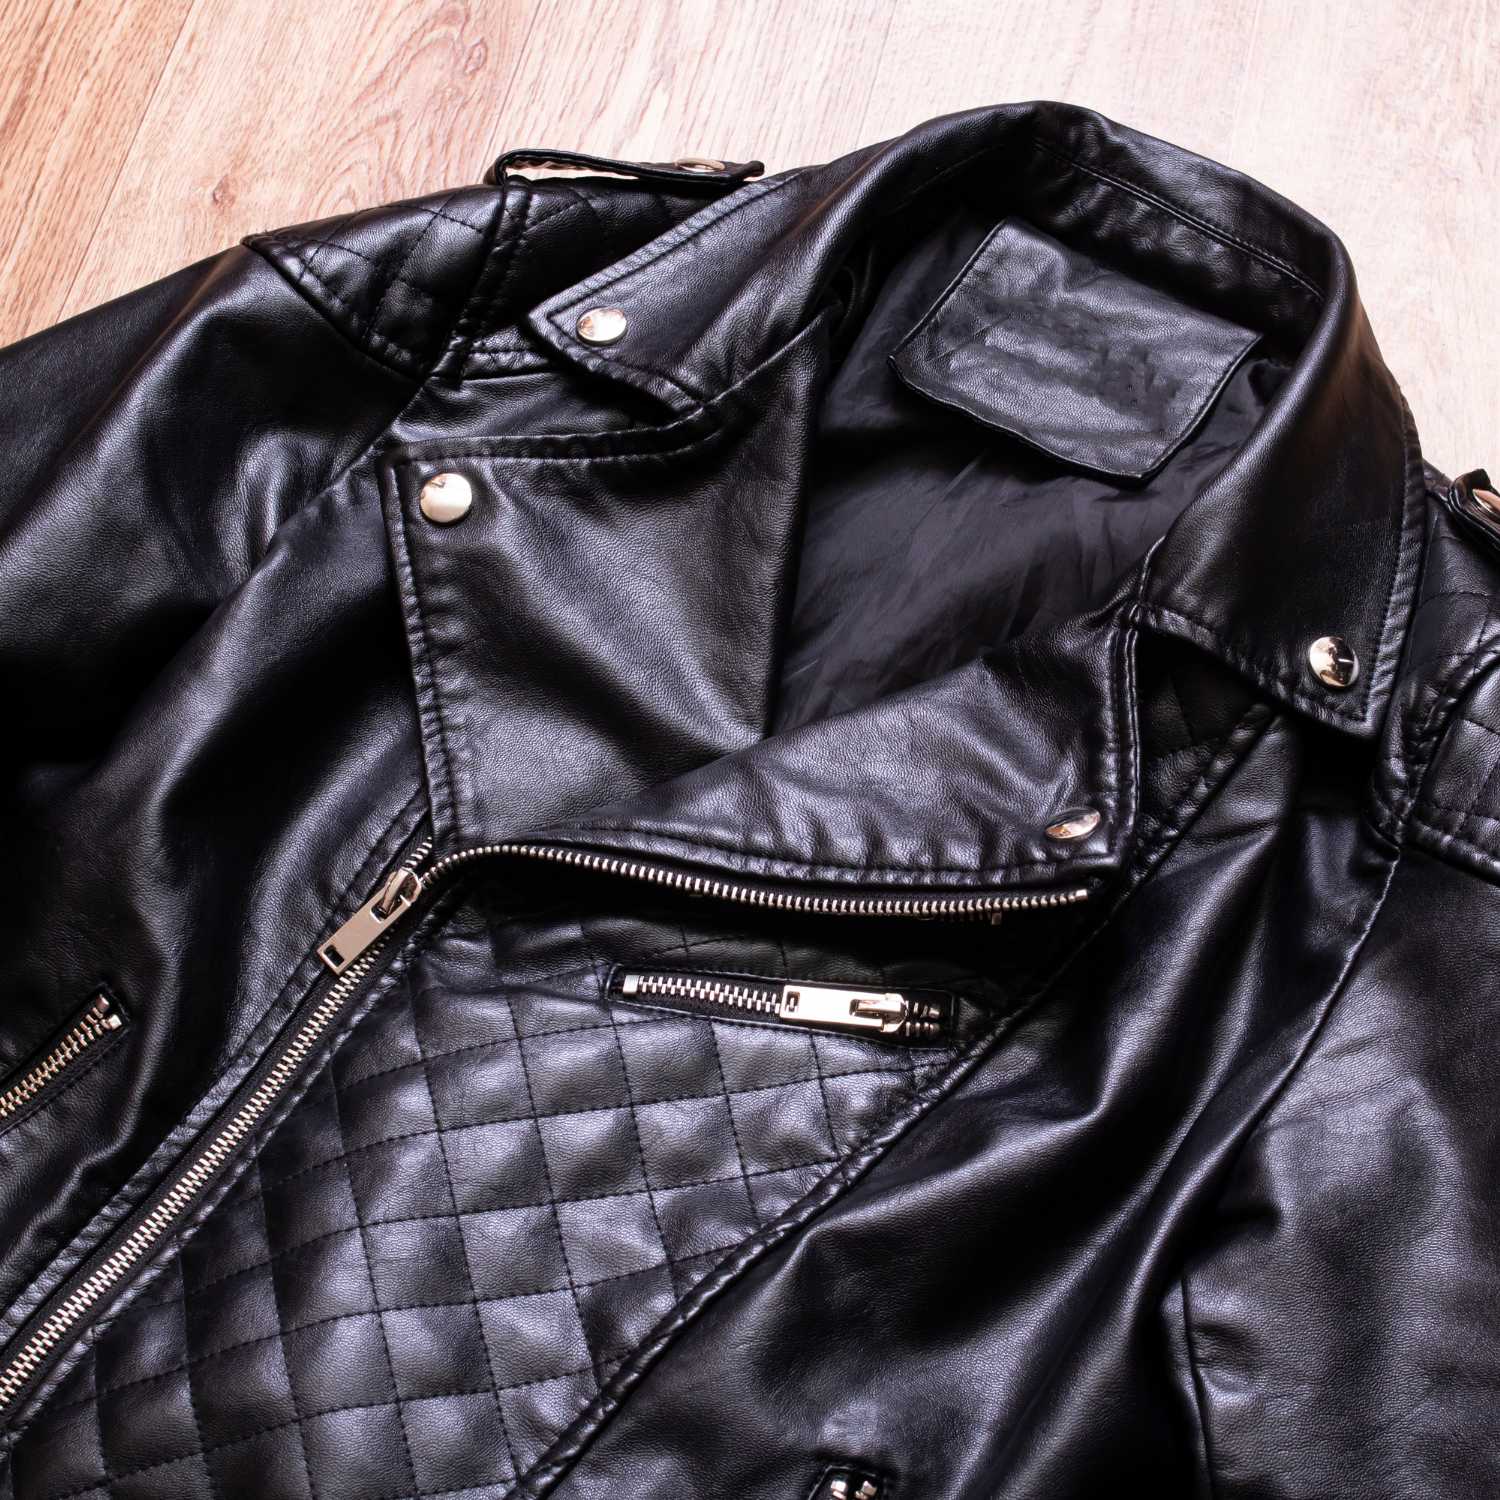 How Long Do Leather Jackets Last? Decoding the Lifespan of a Leather Jacket